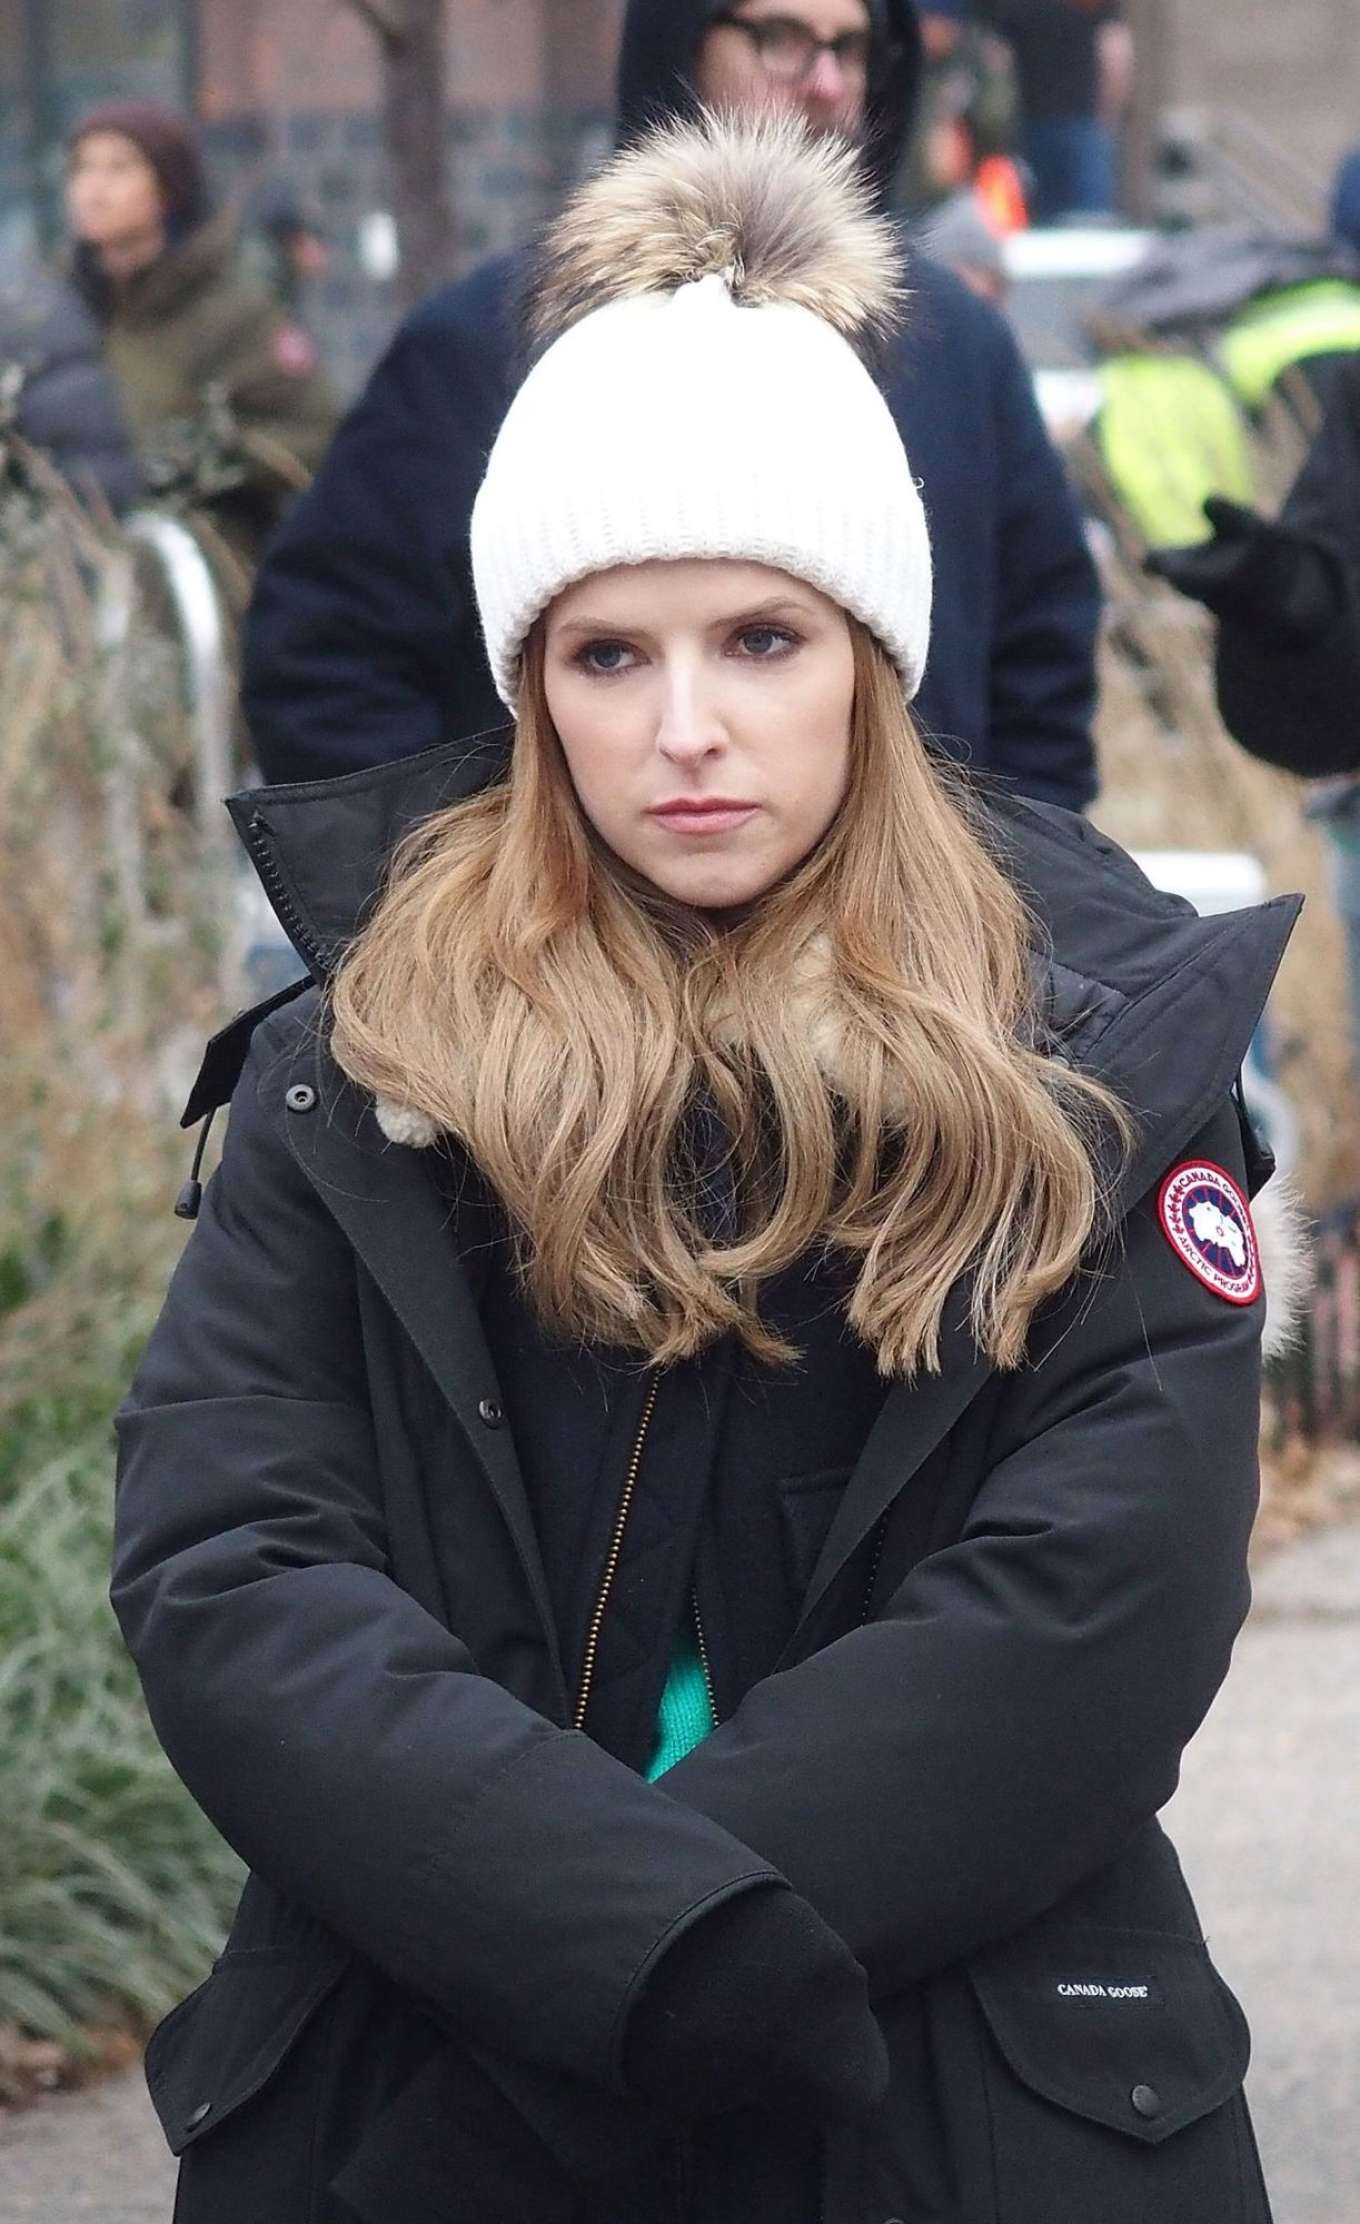 Anna Kendrick - On the set of HBO's 'Love Life' in NY